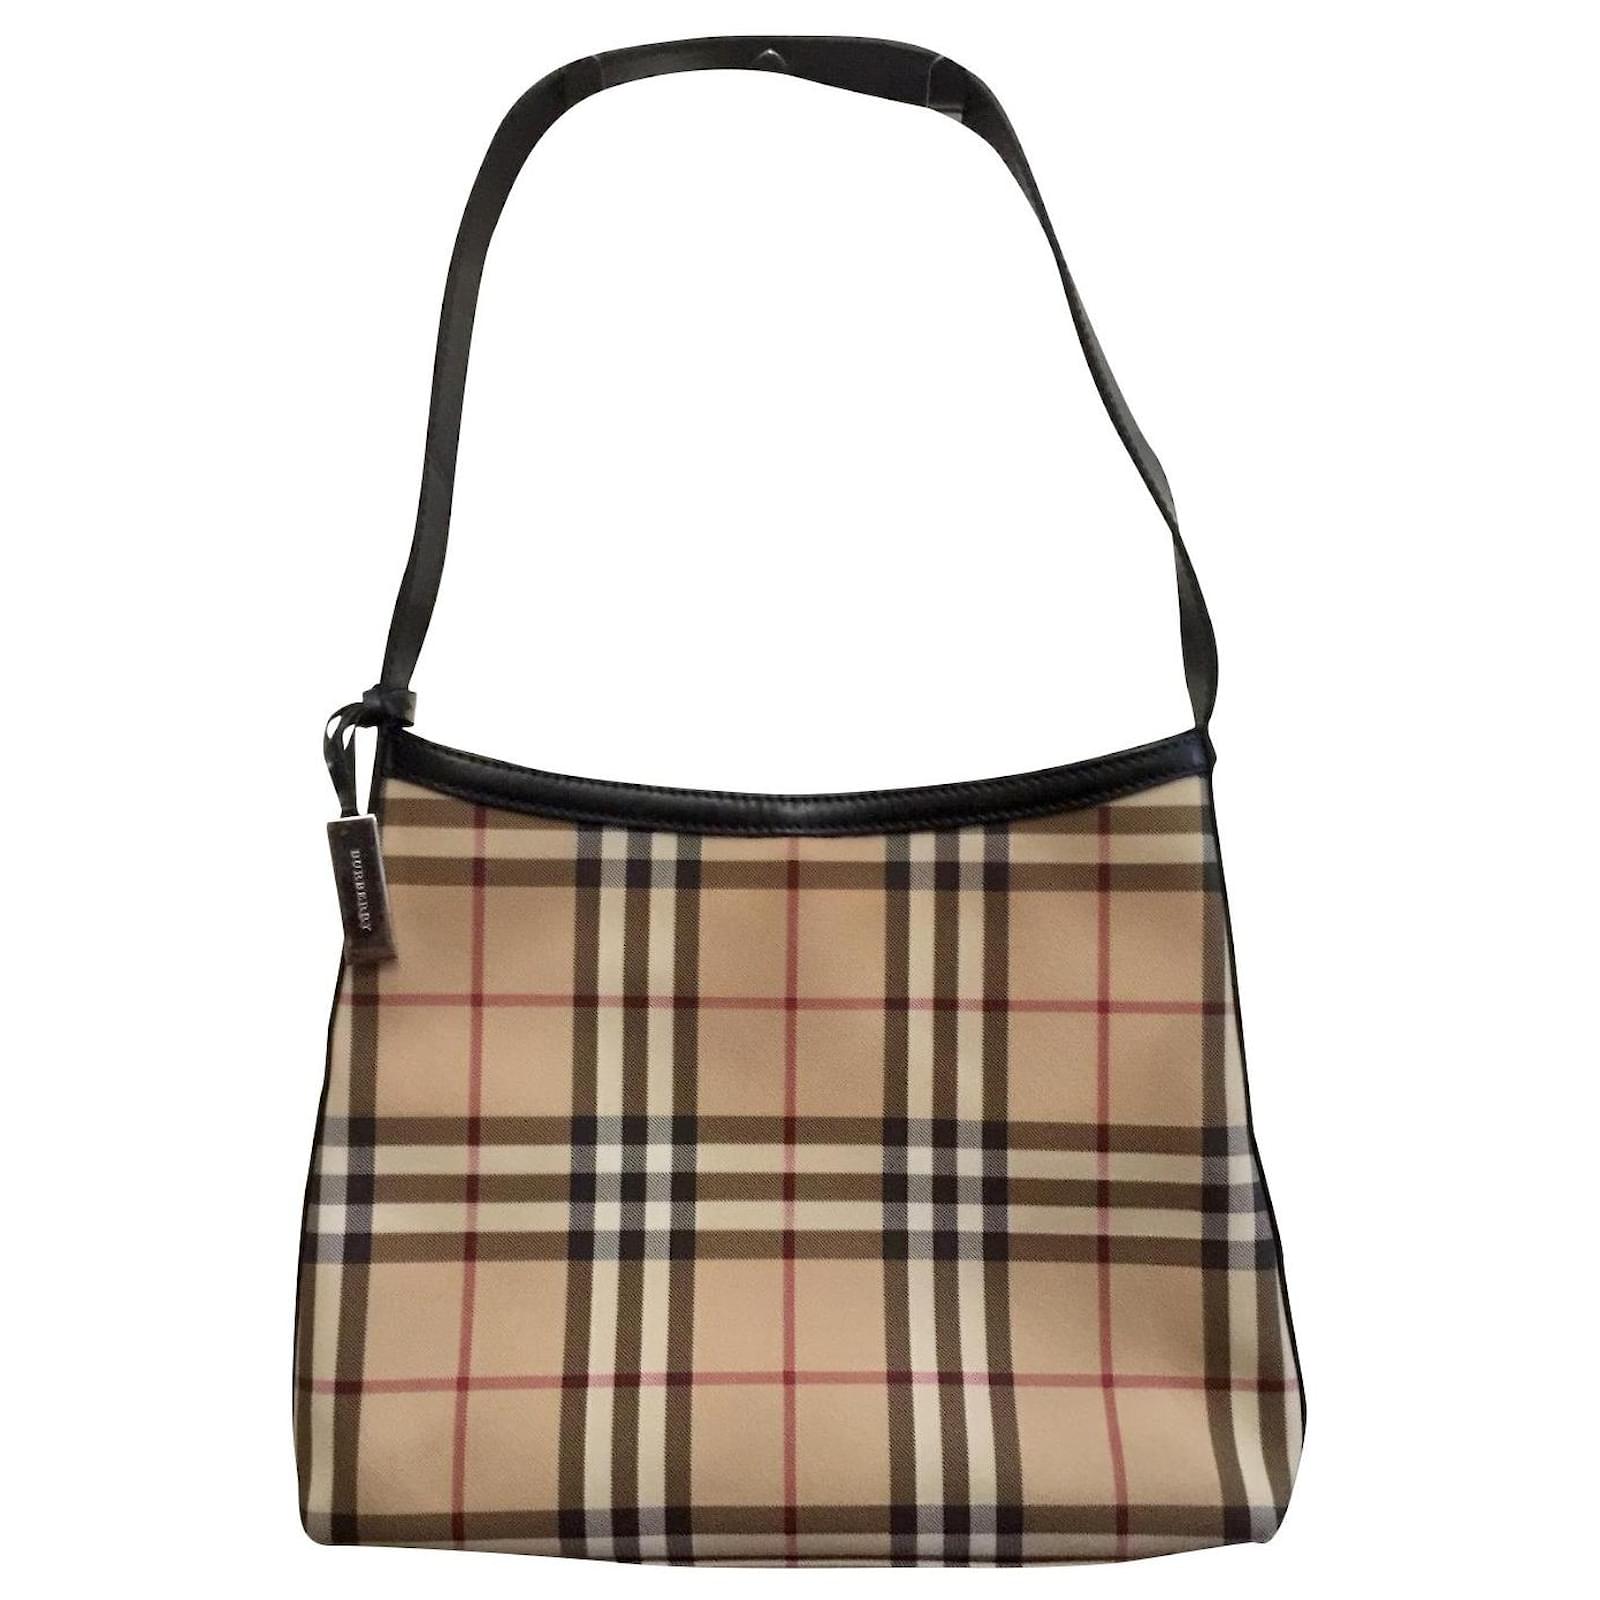 Vintage Burberry tote from coated canvas with leather trim and